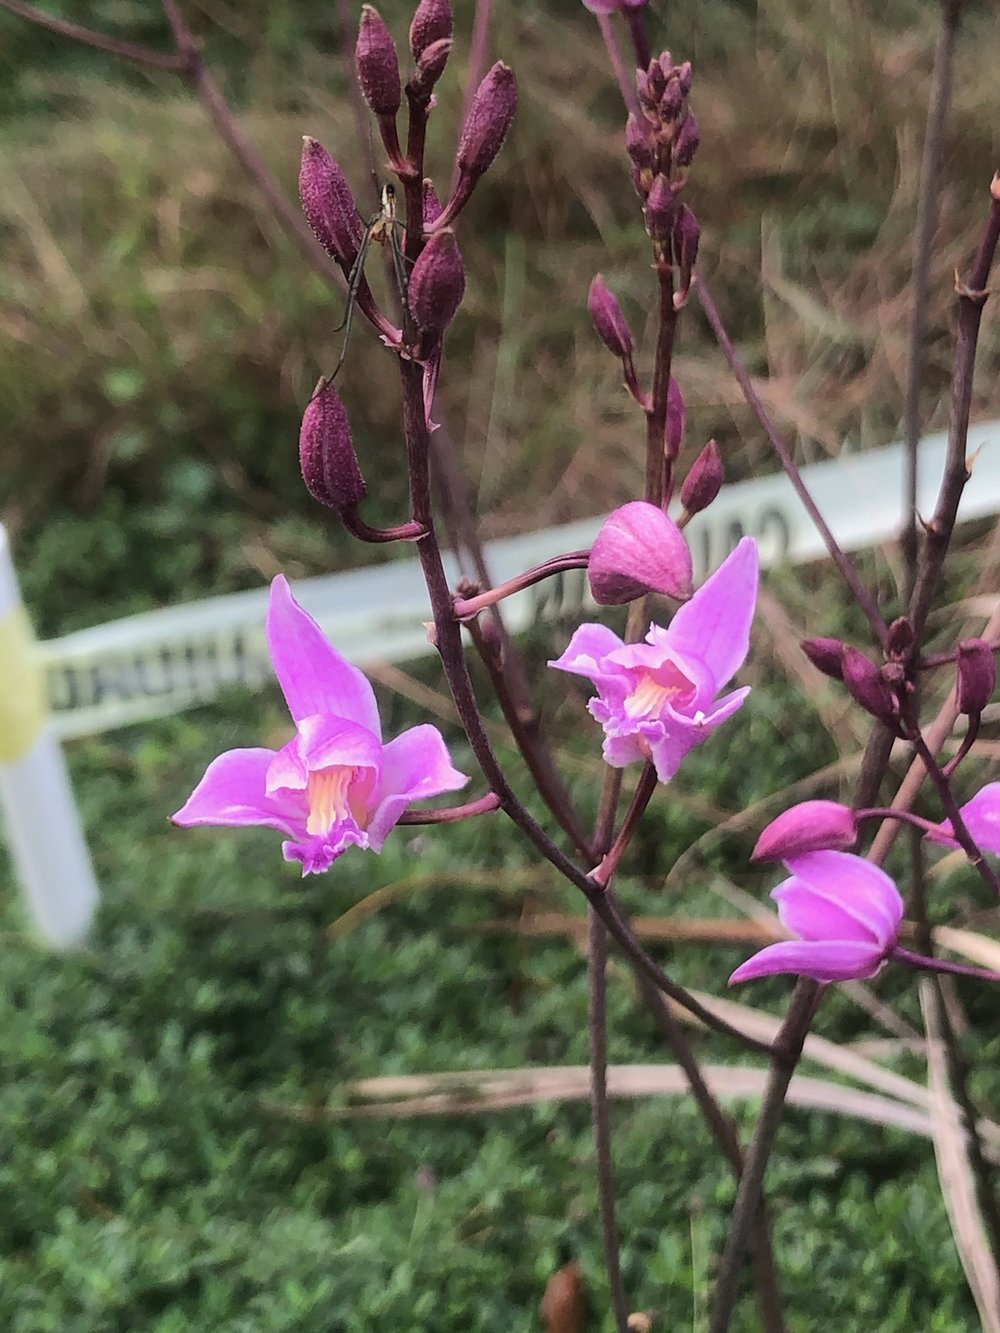   Bletia purpurea  A terrestrial orchid, commonly called the pine pink orchid. It’s native to the highly endangered pine rockland habitat and cypress swamps and is threatened in the state of Florida.  Photo: Dr. Jason Downing 